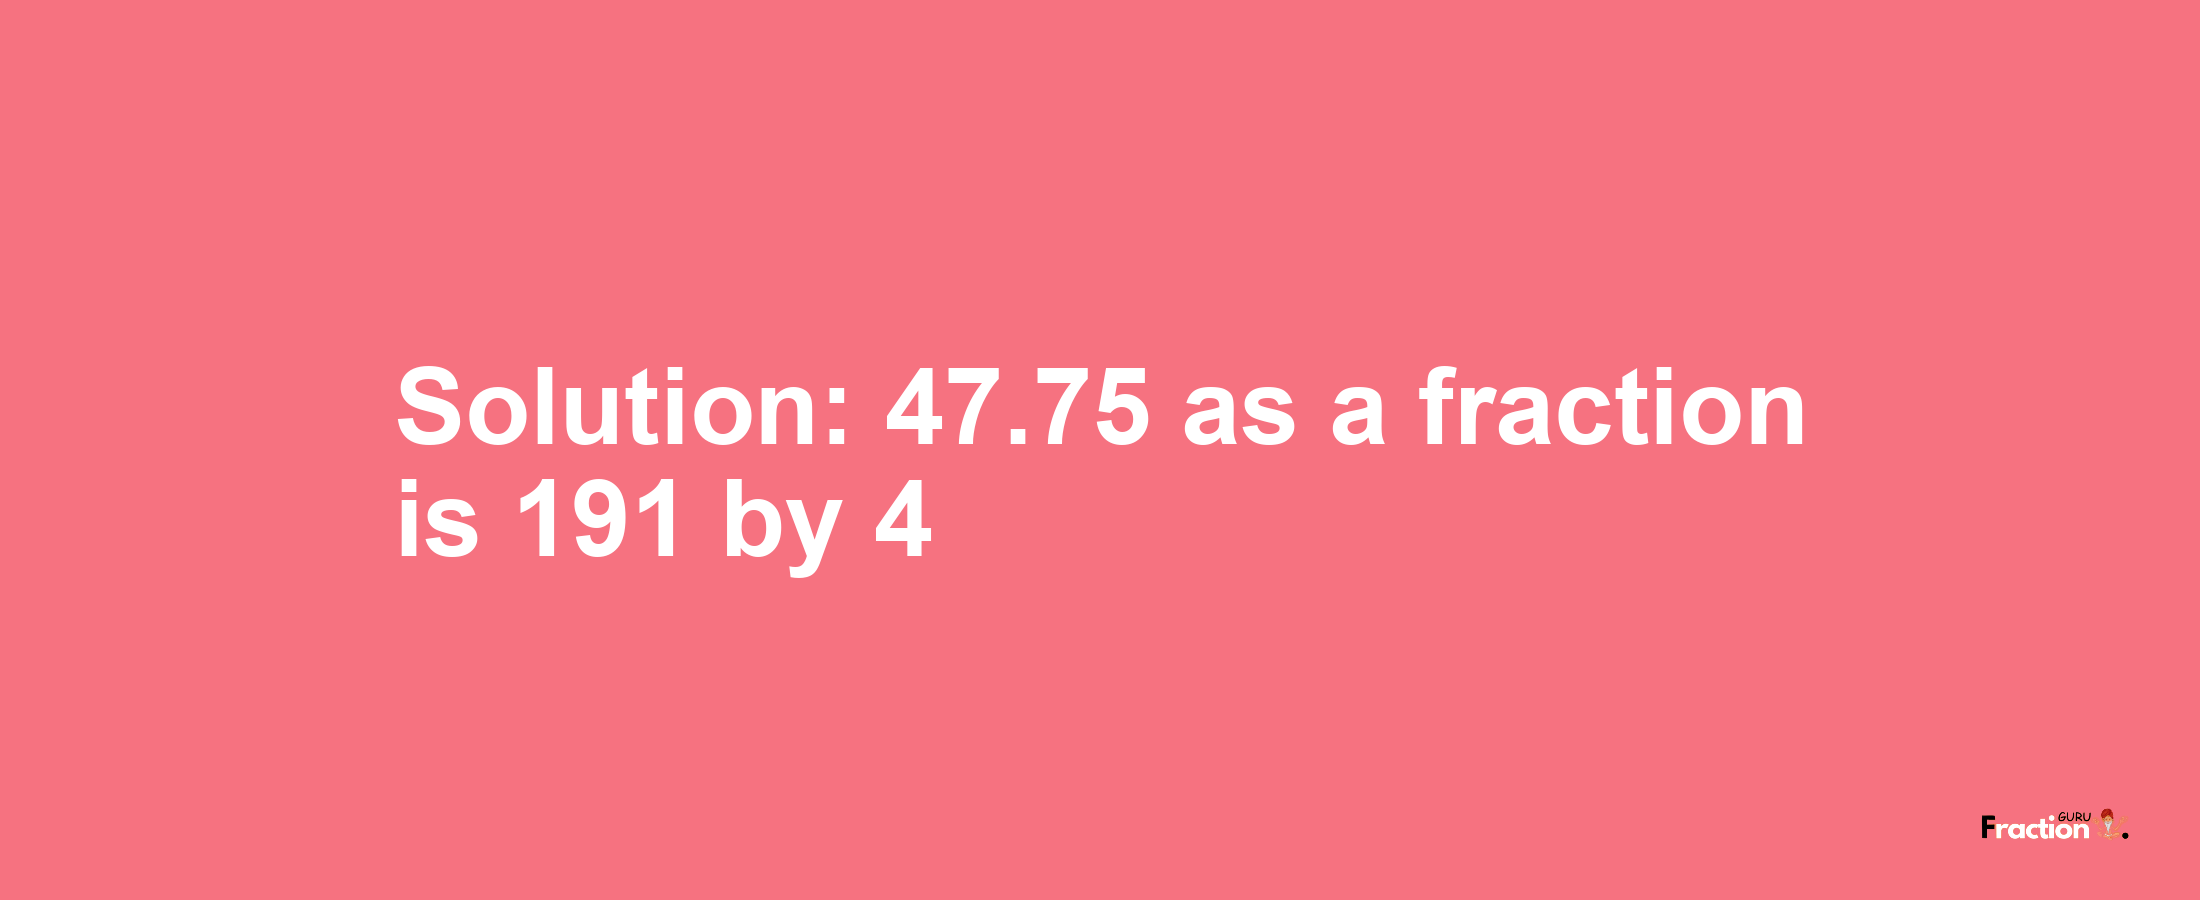 Solution:47.75 as a fraction is 191/4